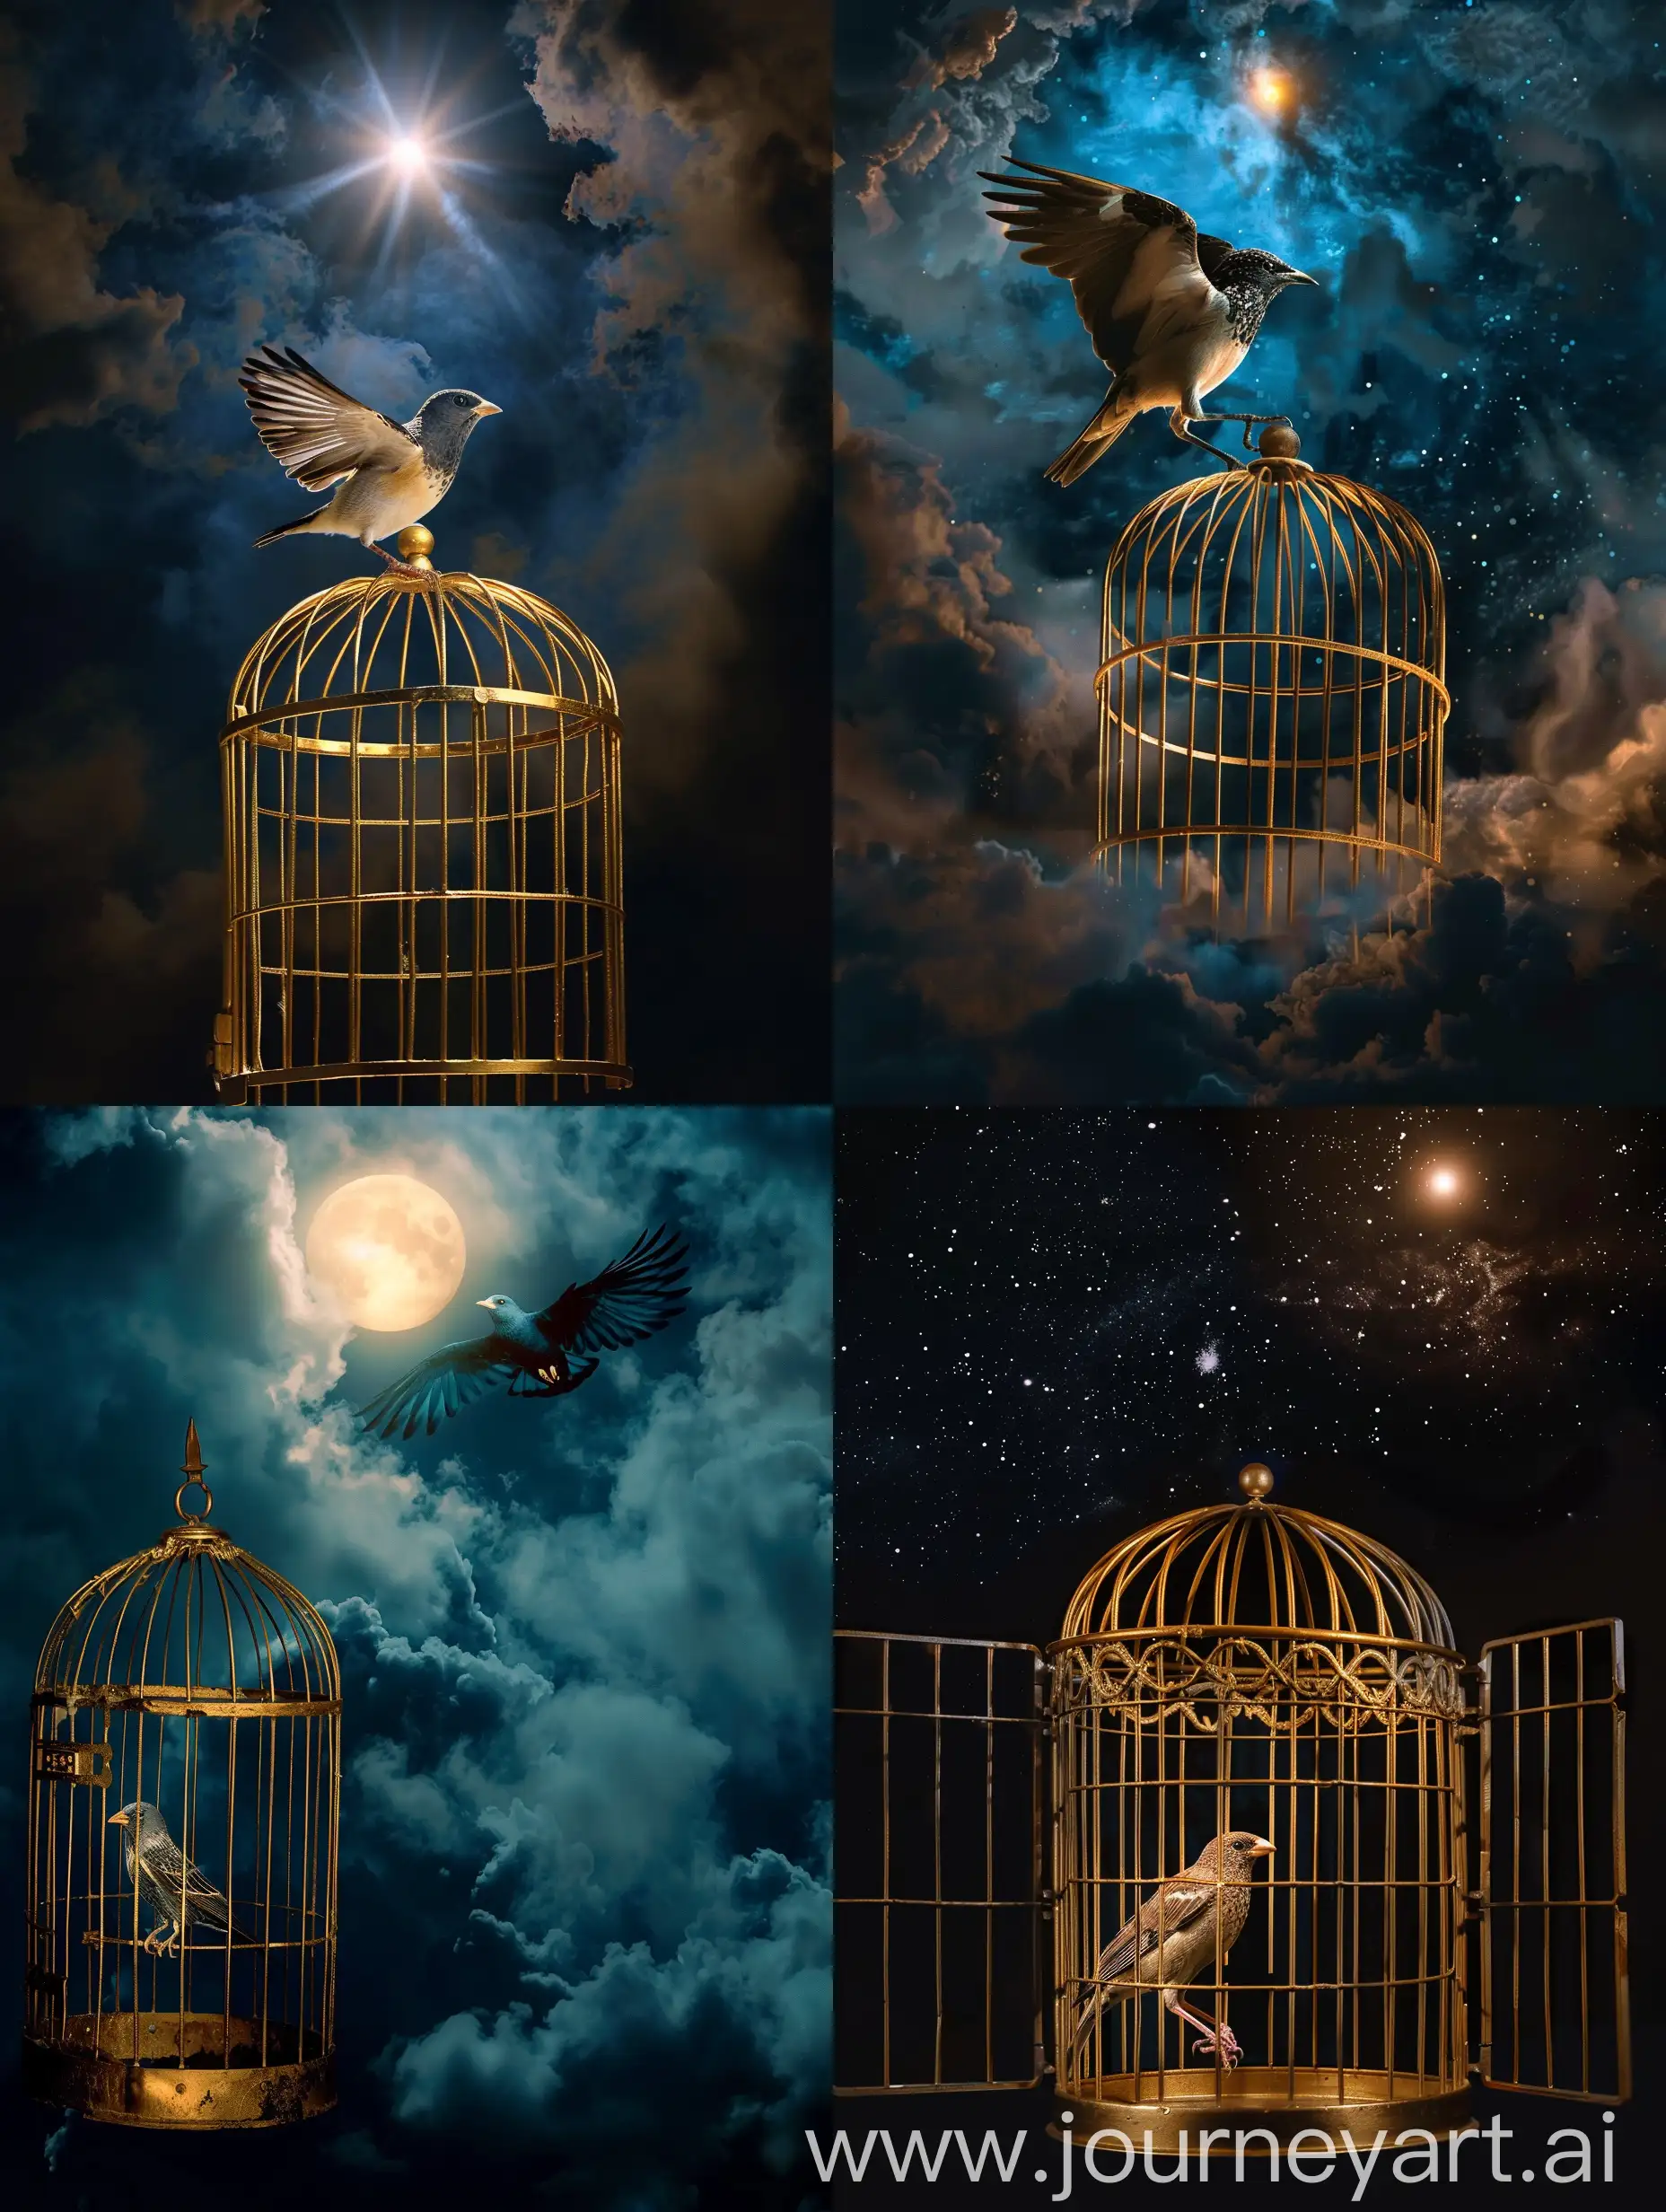 A bird in a gold cage that is scary to go out because there a dark entity but it want to reach the light in the sky